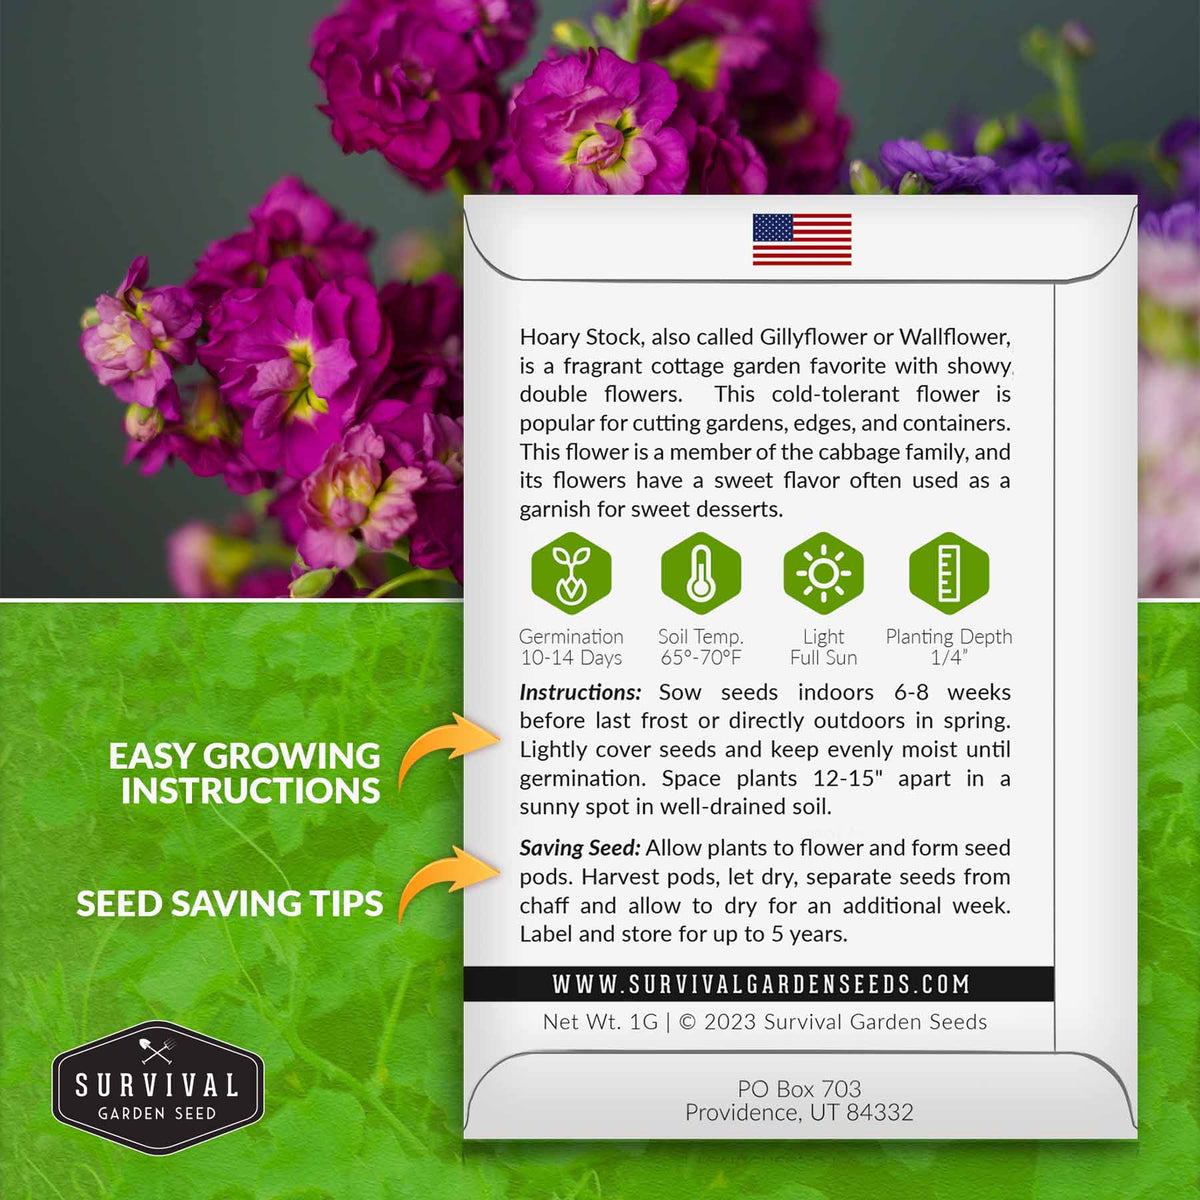 Hoary Stock seed growing instructions